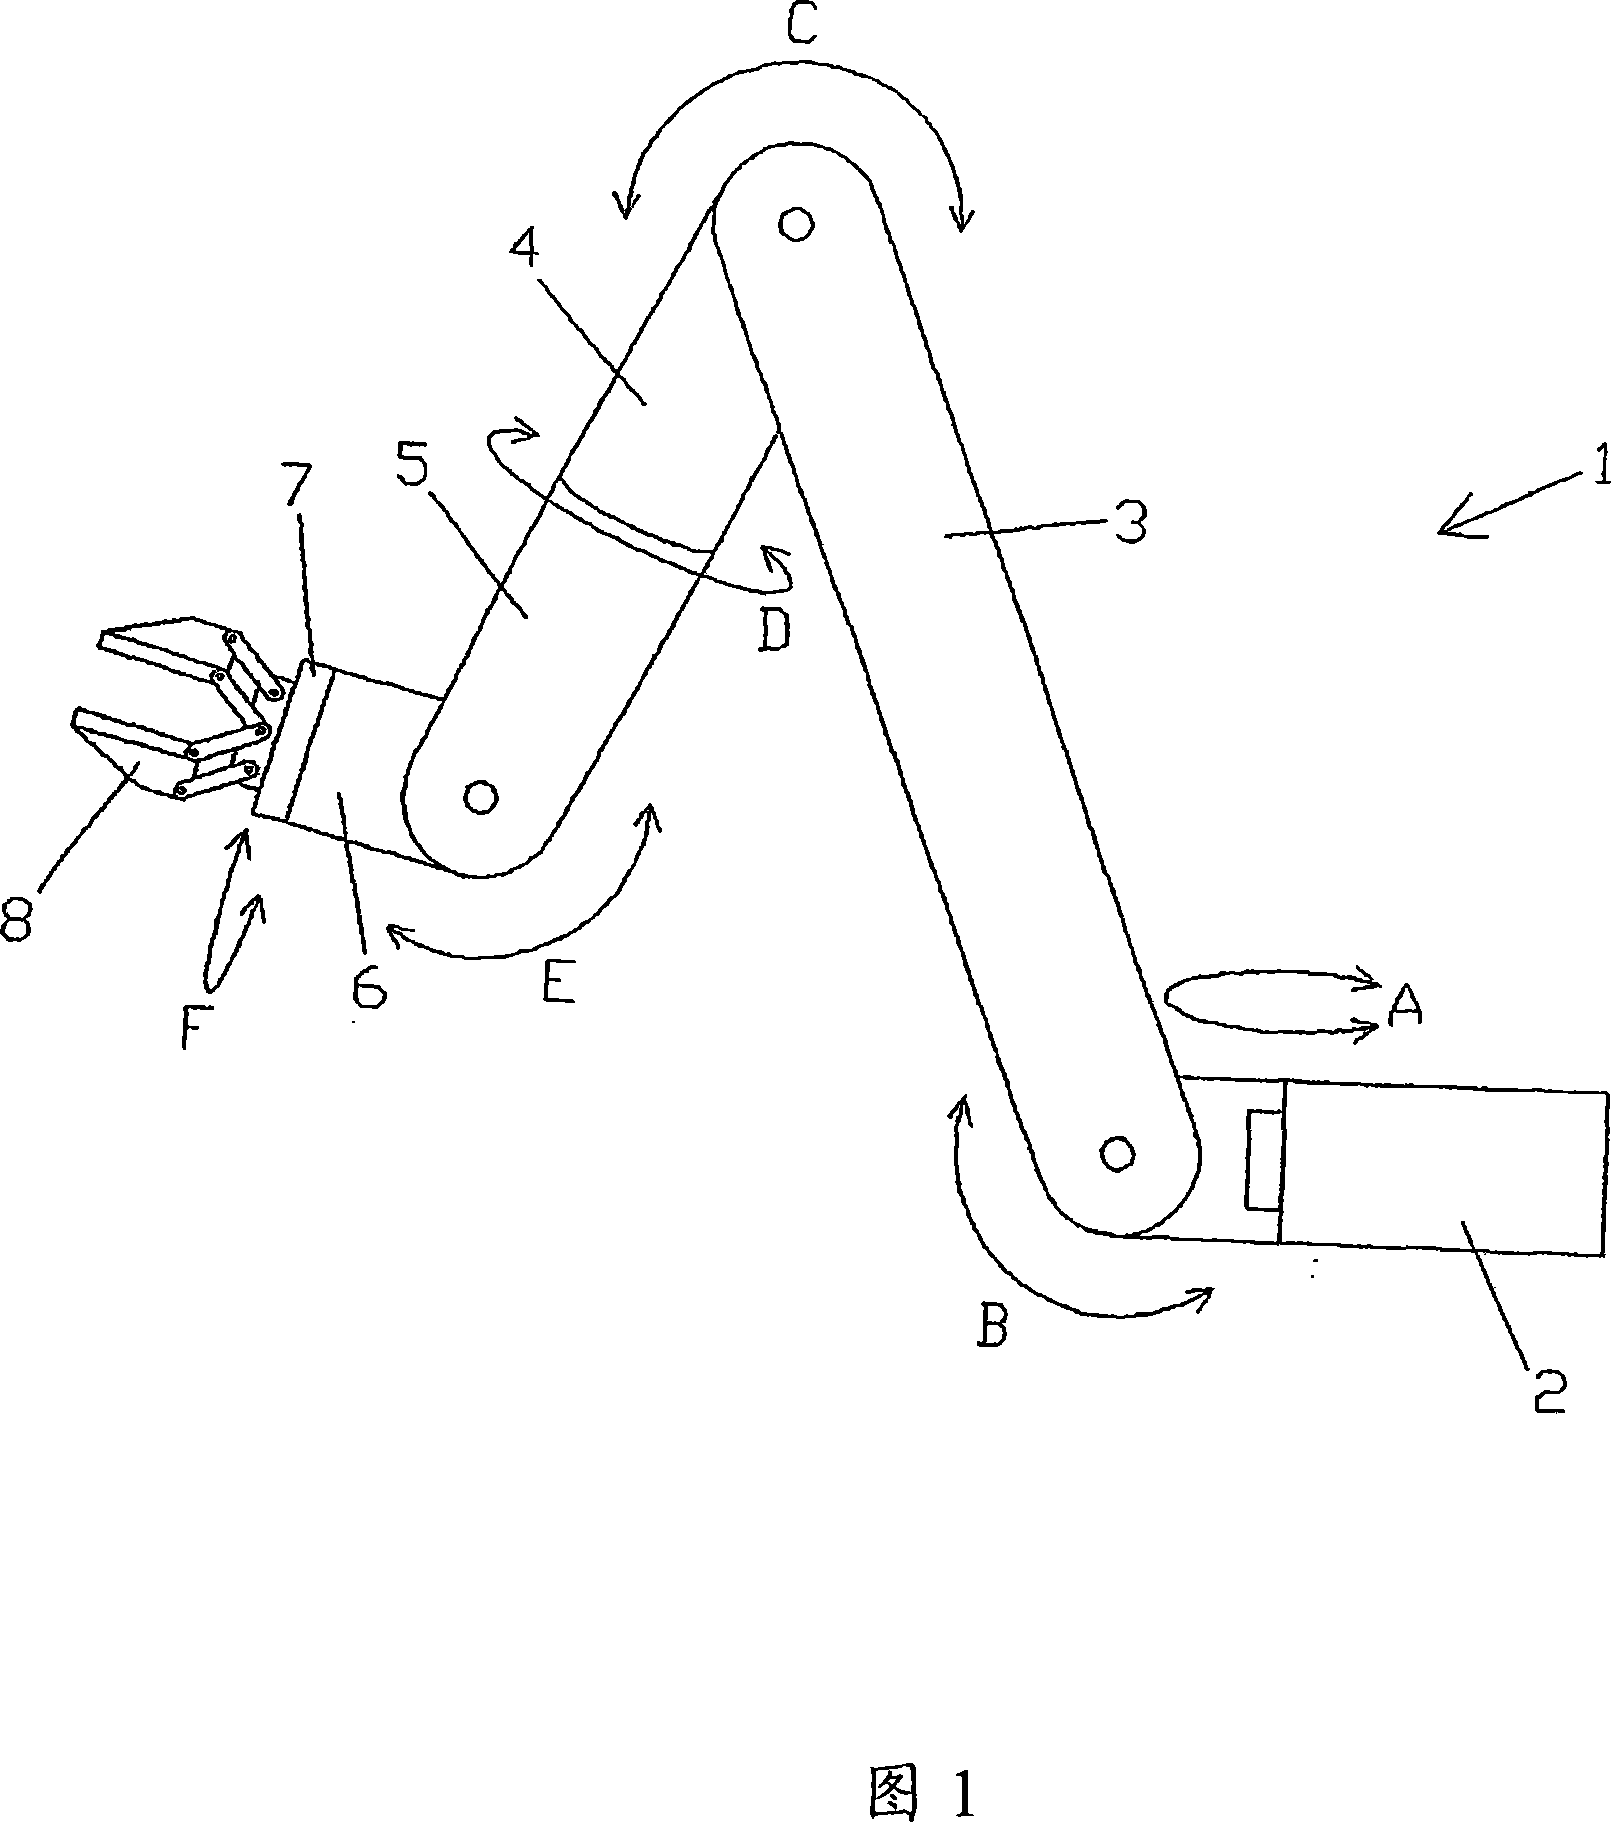 Control system for an articulated manipulator arm